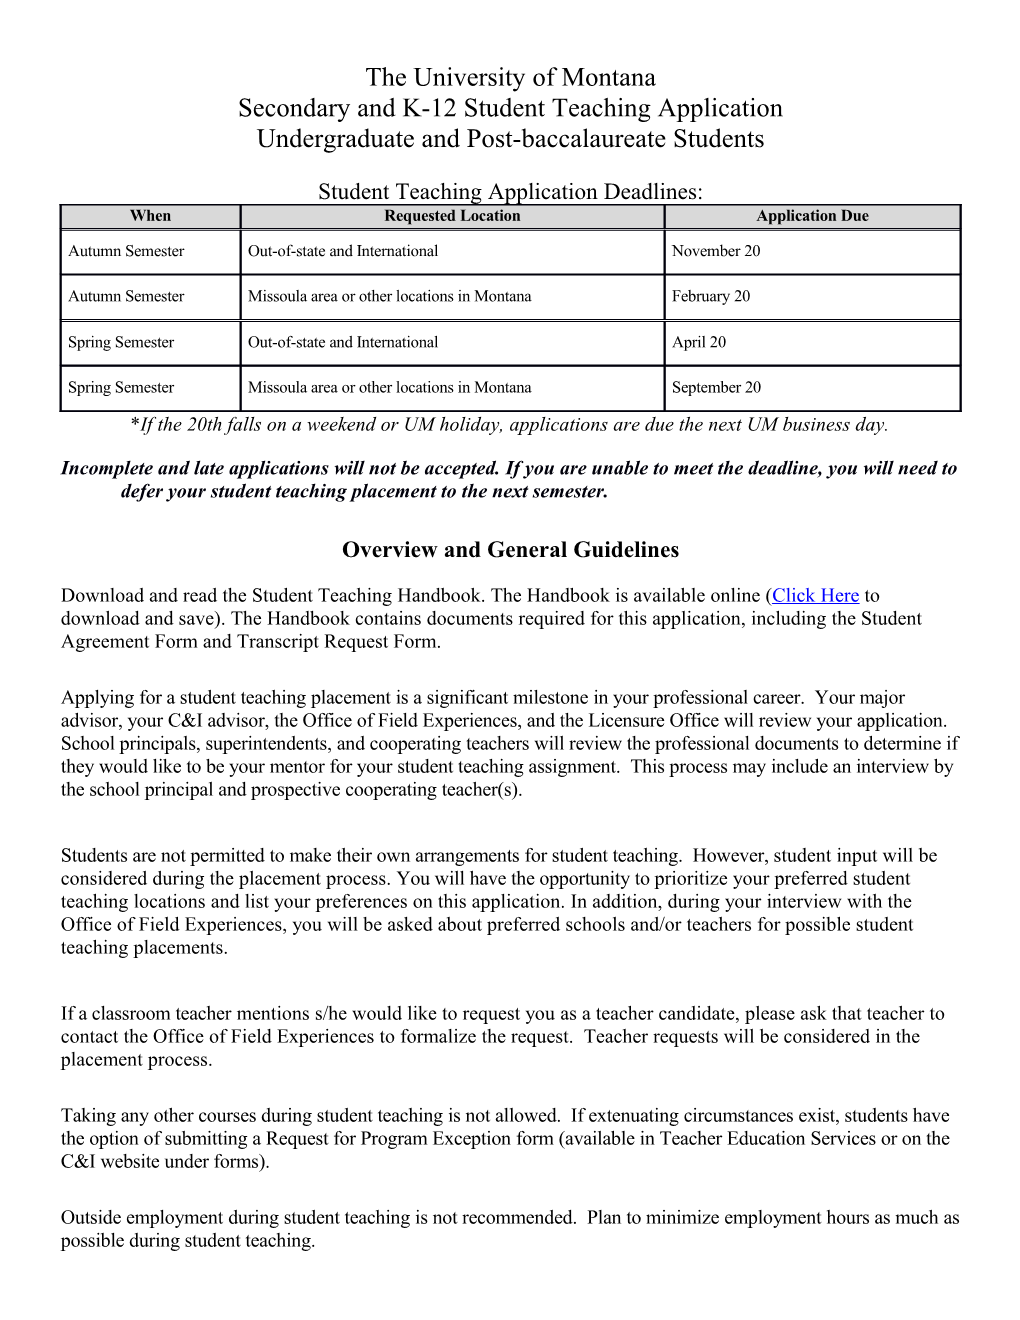 Secondary and K-12 Student Teaching Application